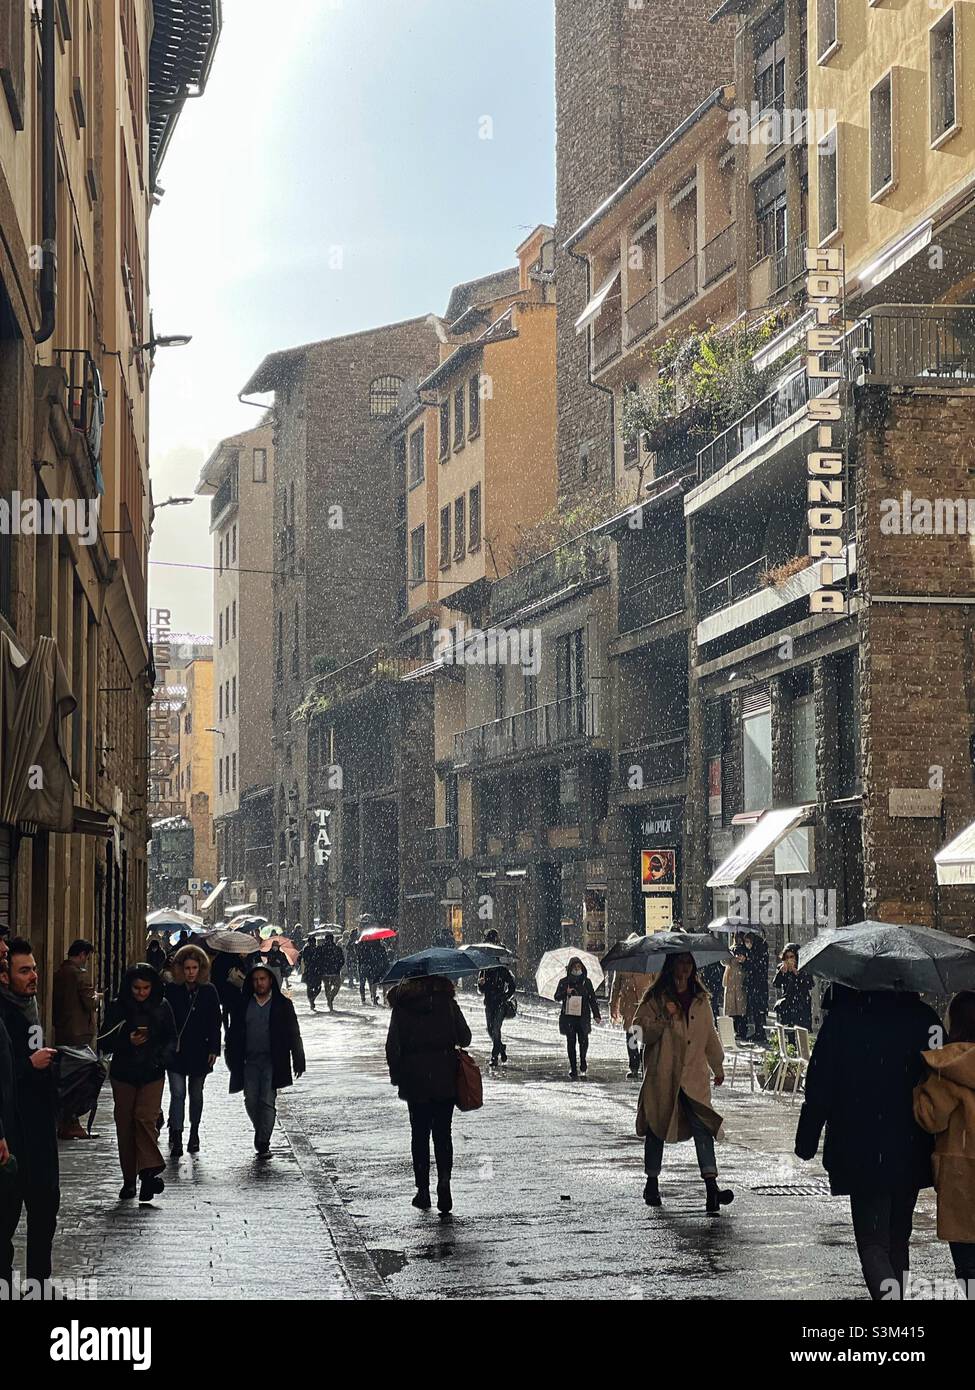 A Rainy Day In Florence